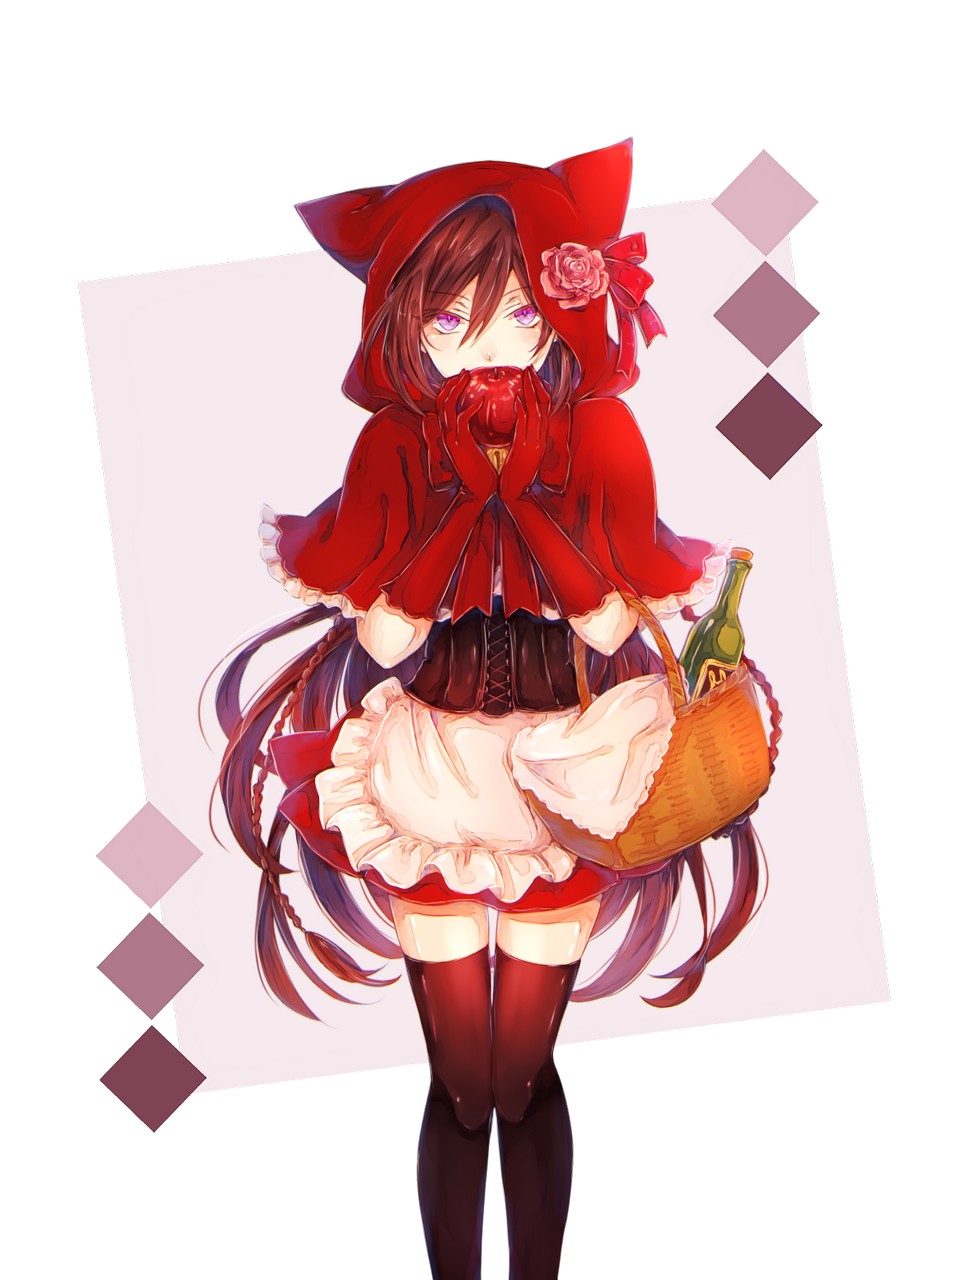 Alice Pandora Hearts Little Red Riding Hood Character By Coro9